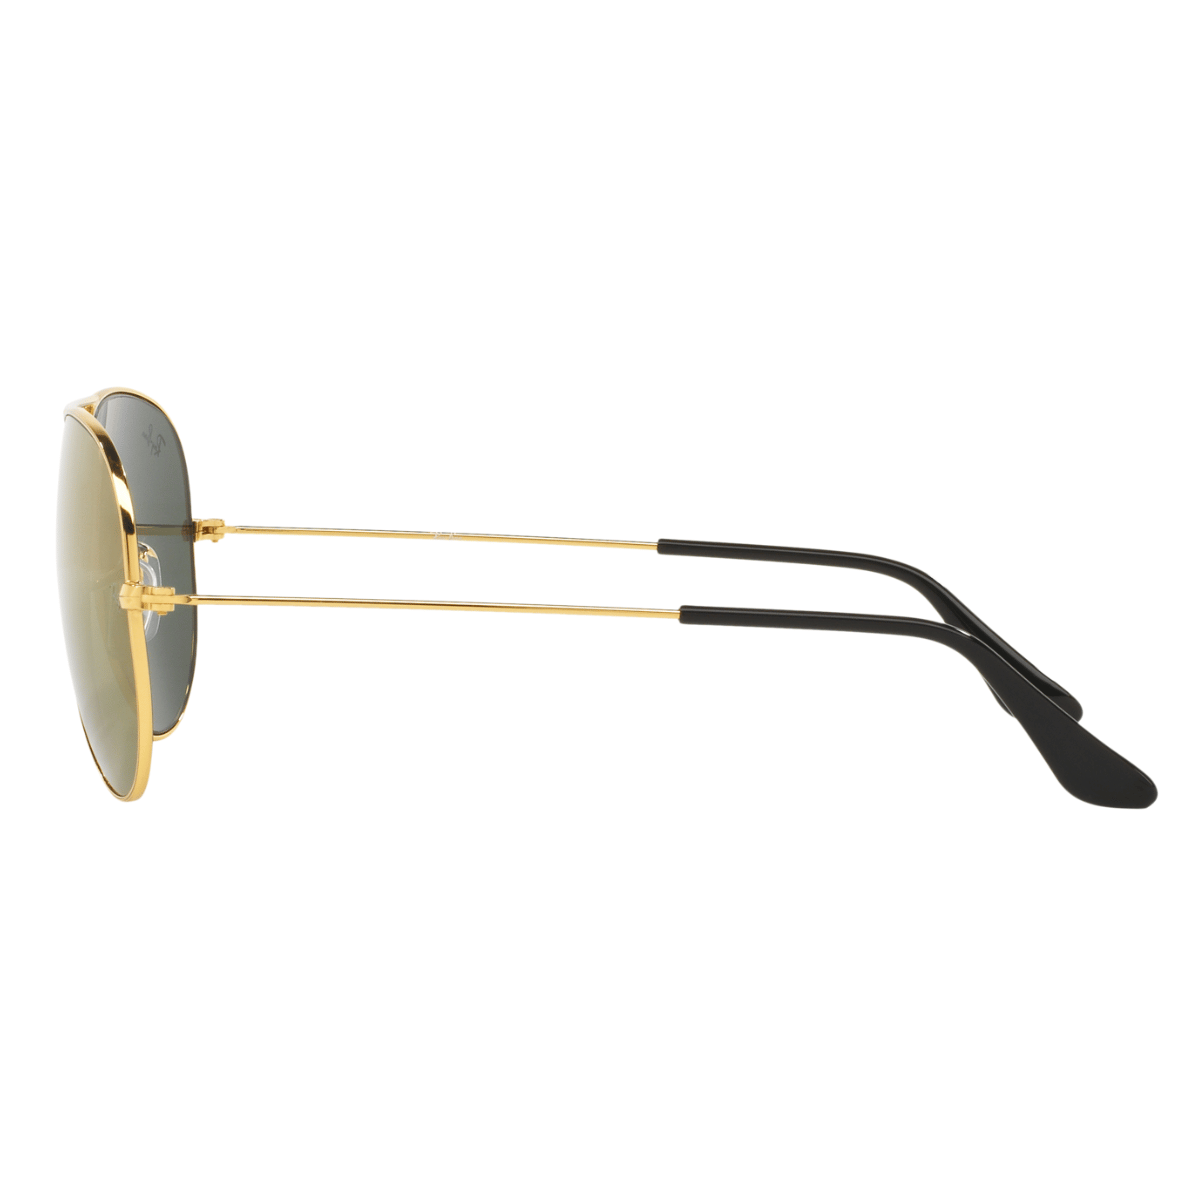 "Ray-Ban Aviator Mirror Sunglasses: Discover timeless style and glare protection with RB3025I W3276 58 Gold Green Mirror Gold sunglasses for men and women. Classic pilot frame in gold with stunning green mirror gold lenses."